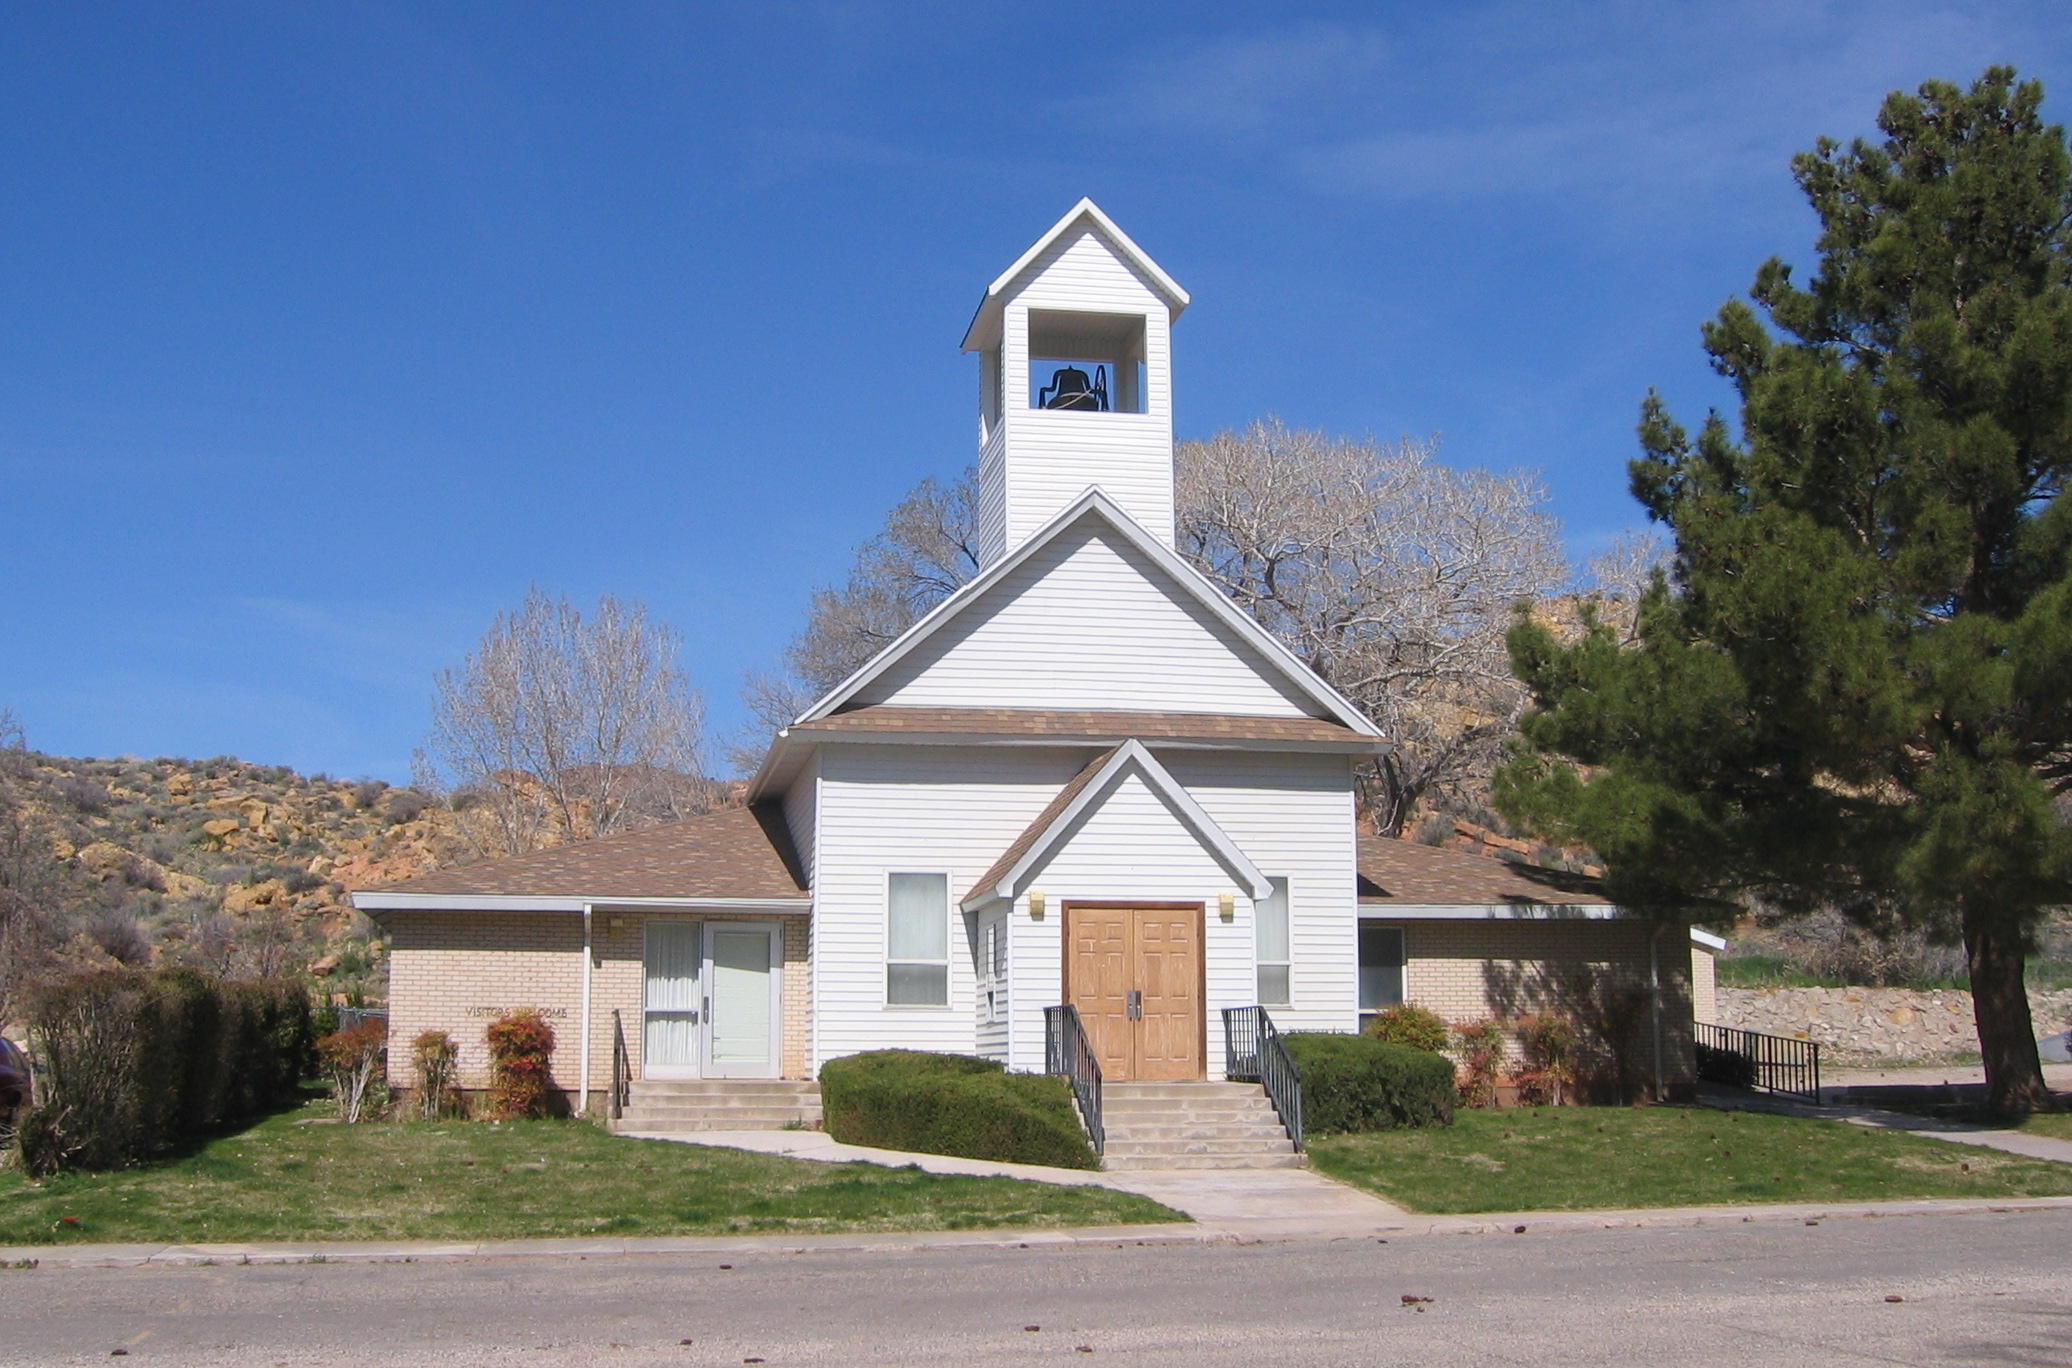 Front of the old Gunlock church building